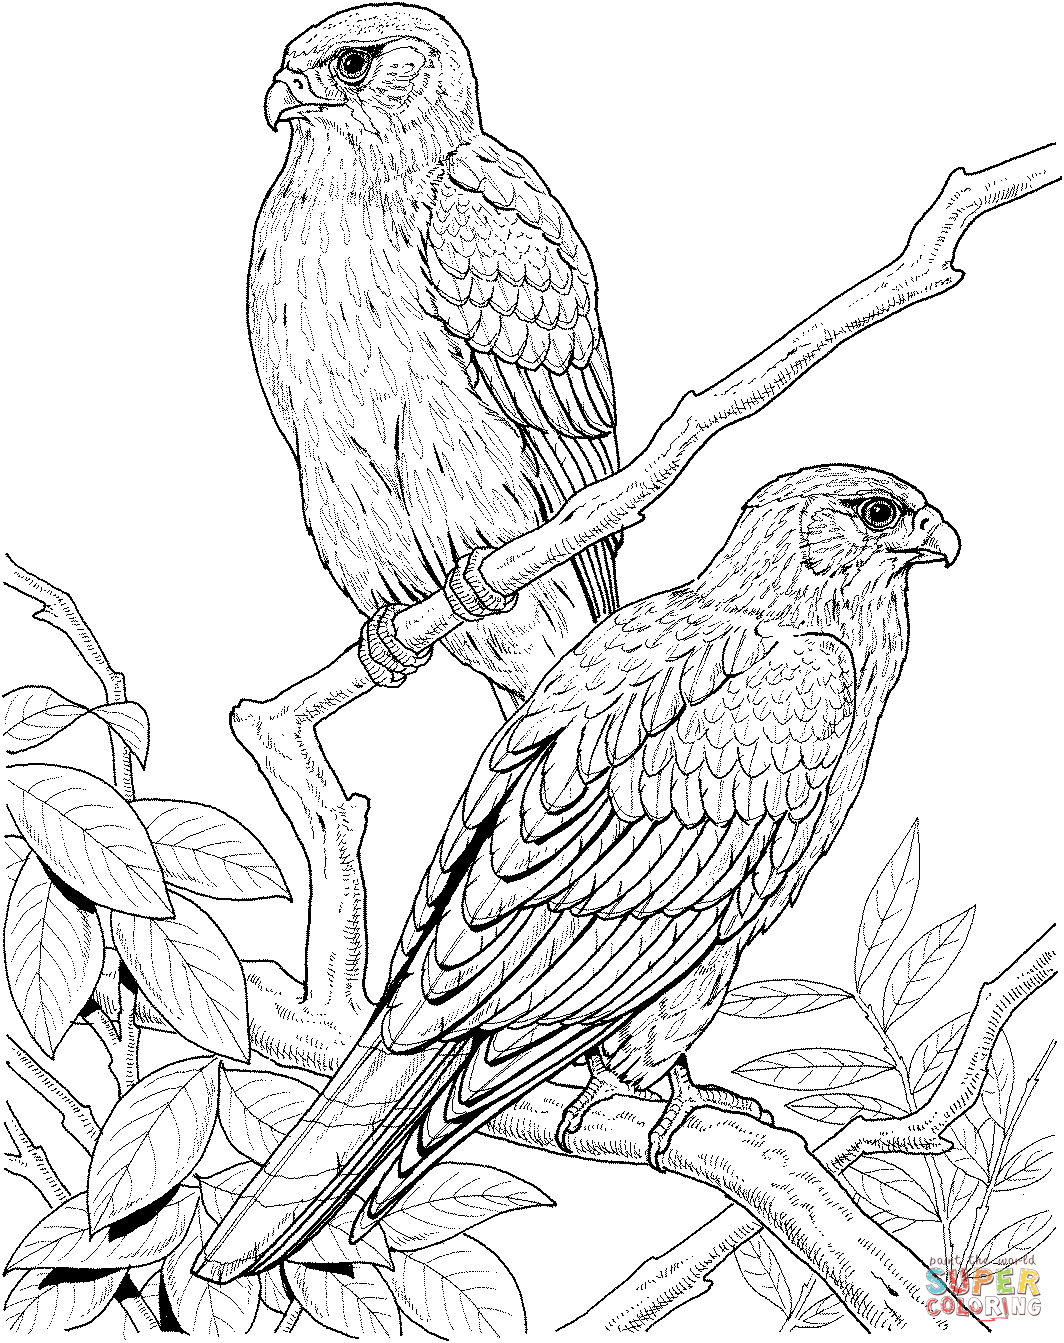 Peregrine Falcon coloring #9, Download drawings